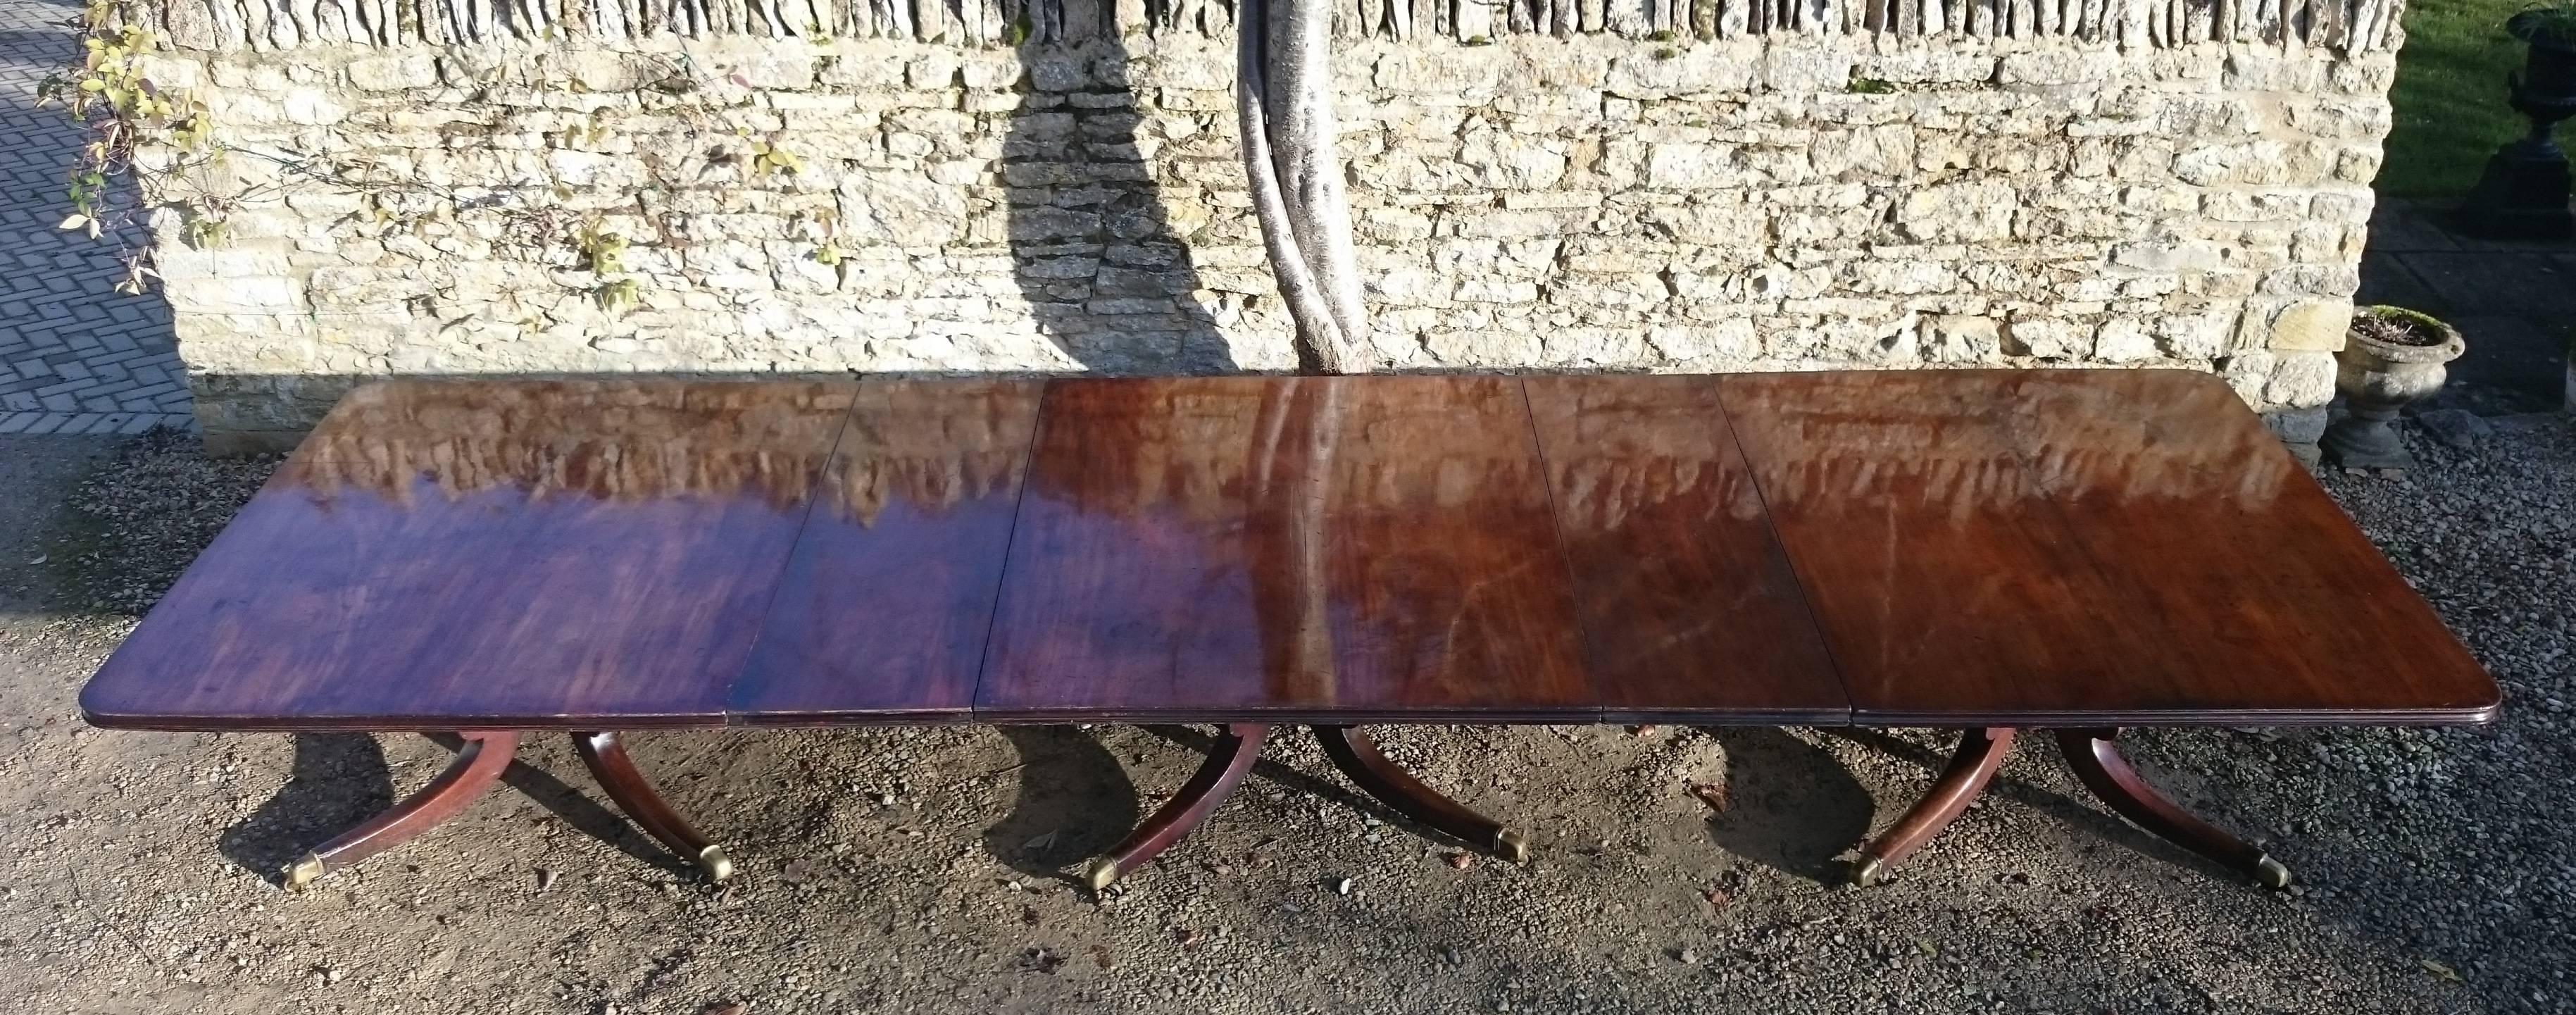 Antique three pedestal dining table made of huge sheets of really fine quality Cuban mahogany. This table has it all, excellent color and patination, a wonderful country house scale and outstretched legs which terminate parallel to the ground. The